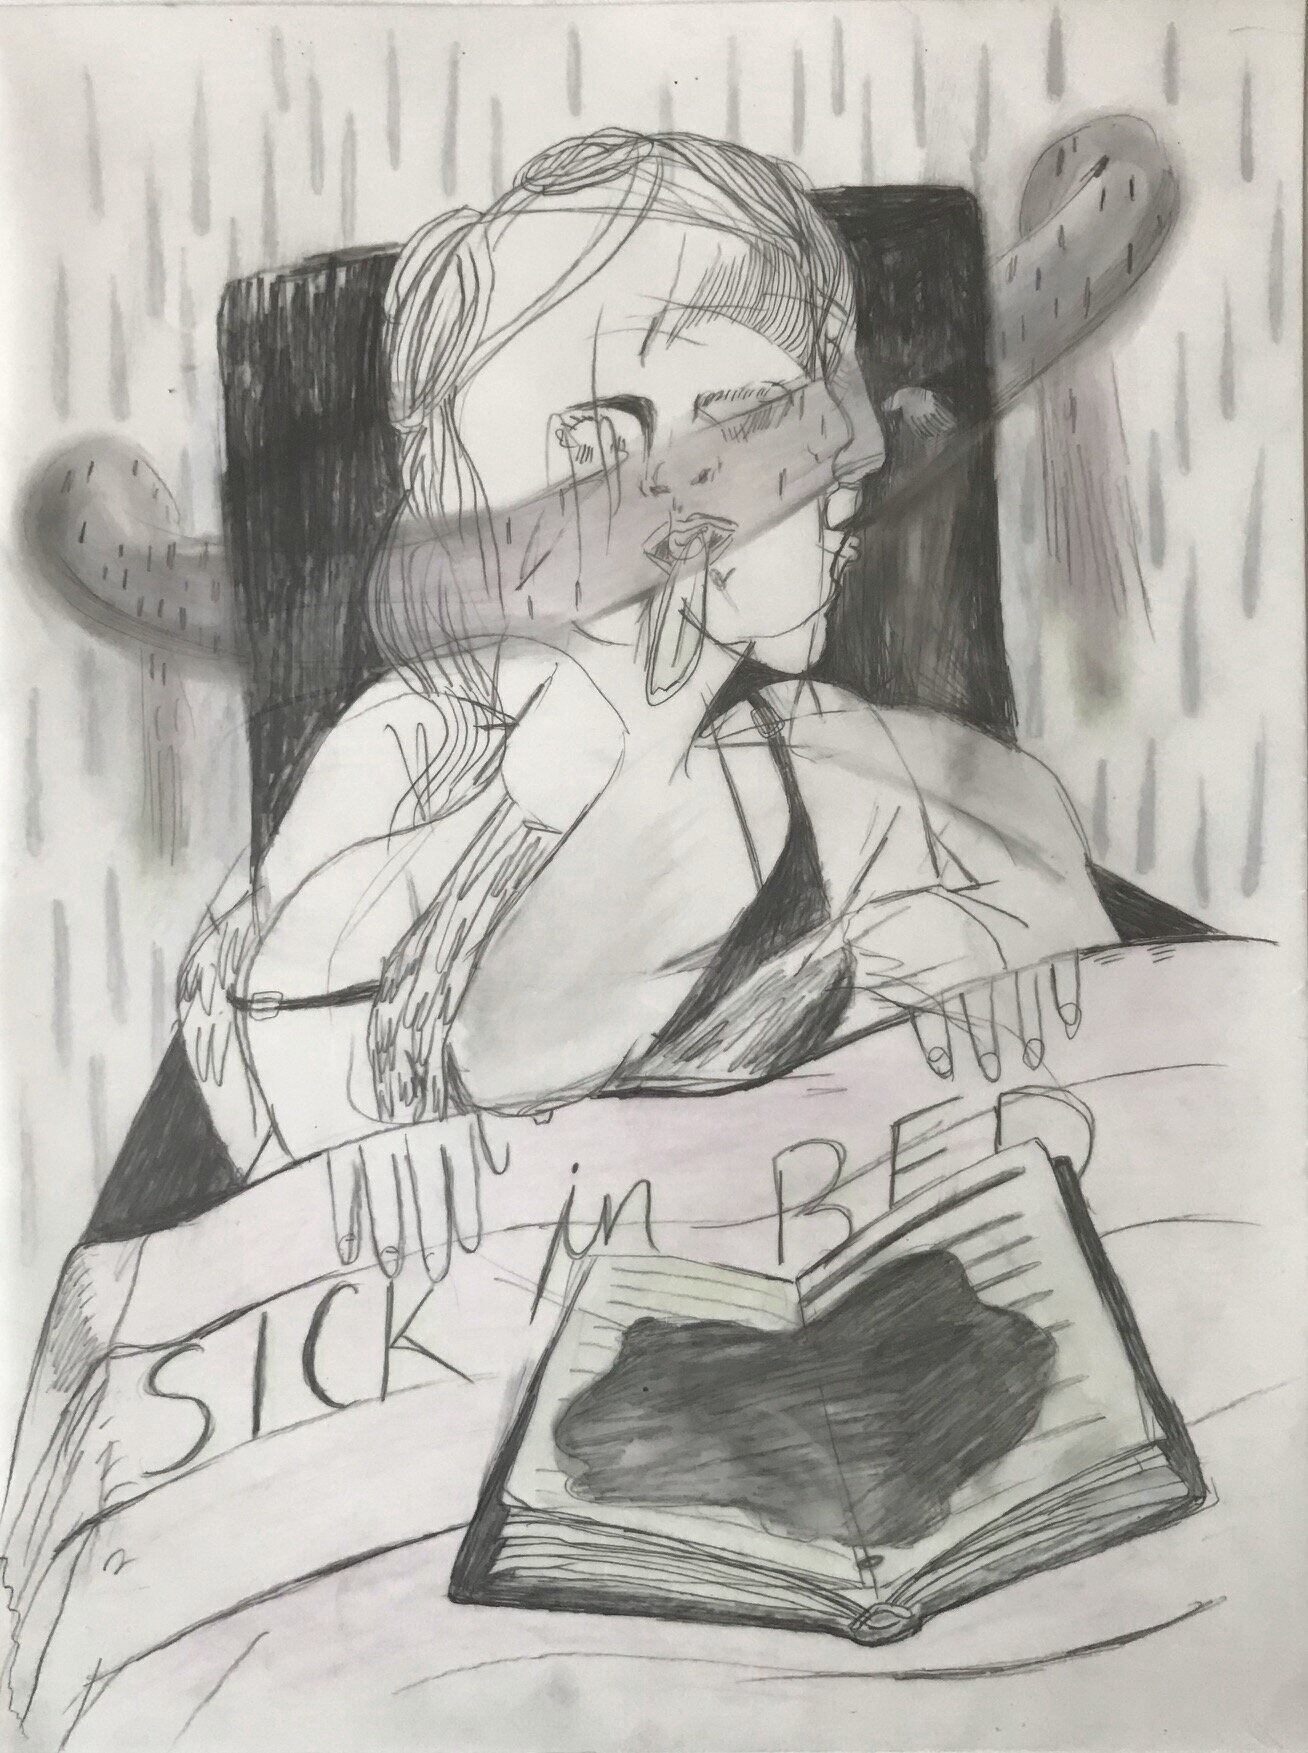   Sick in bed , 2019, graphite and colored pencil on Yupo paper, 8 x 11 inches 